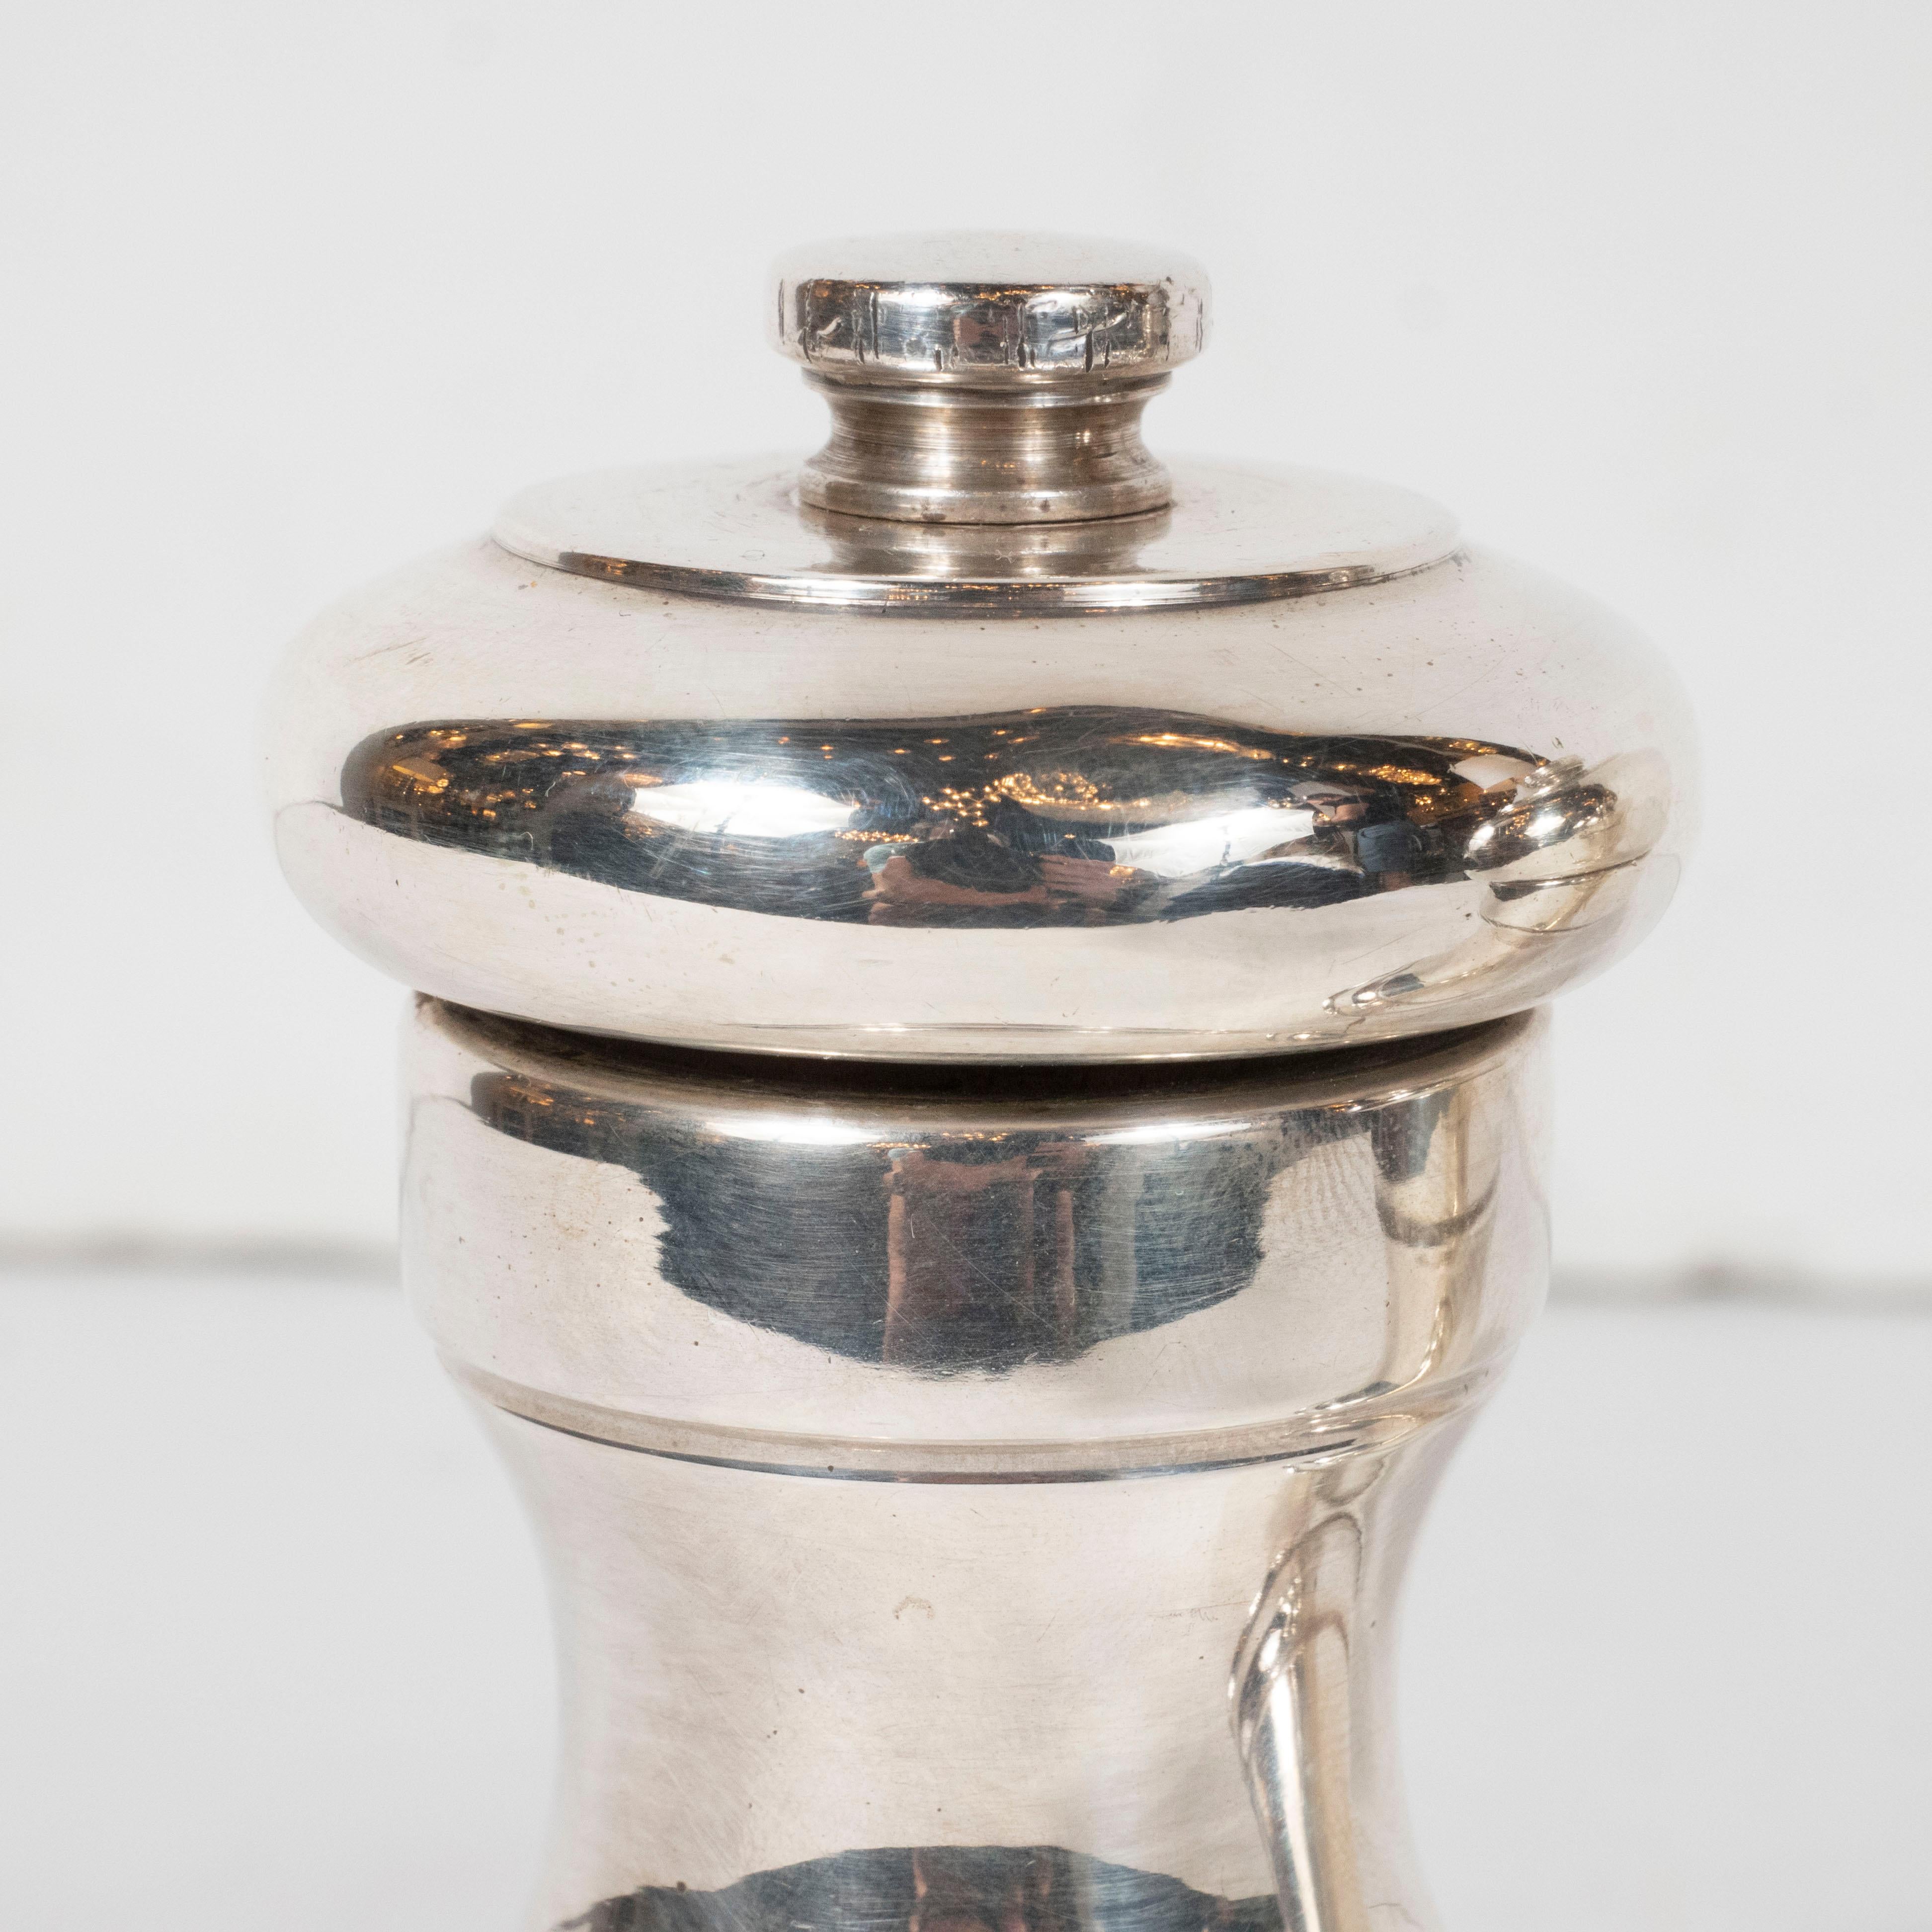 This elegant Mid-Century Modern salt and pepper shaker sterling silver salt and pepper shaker set were realized by the esteemed design firm Peugot in France, circa 1960. They feature hourglass form stepped bodies with finials at the top of each in